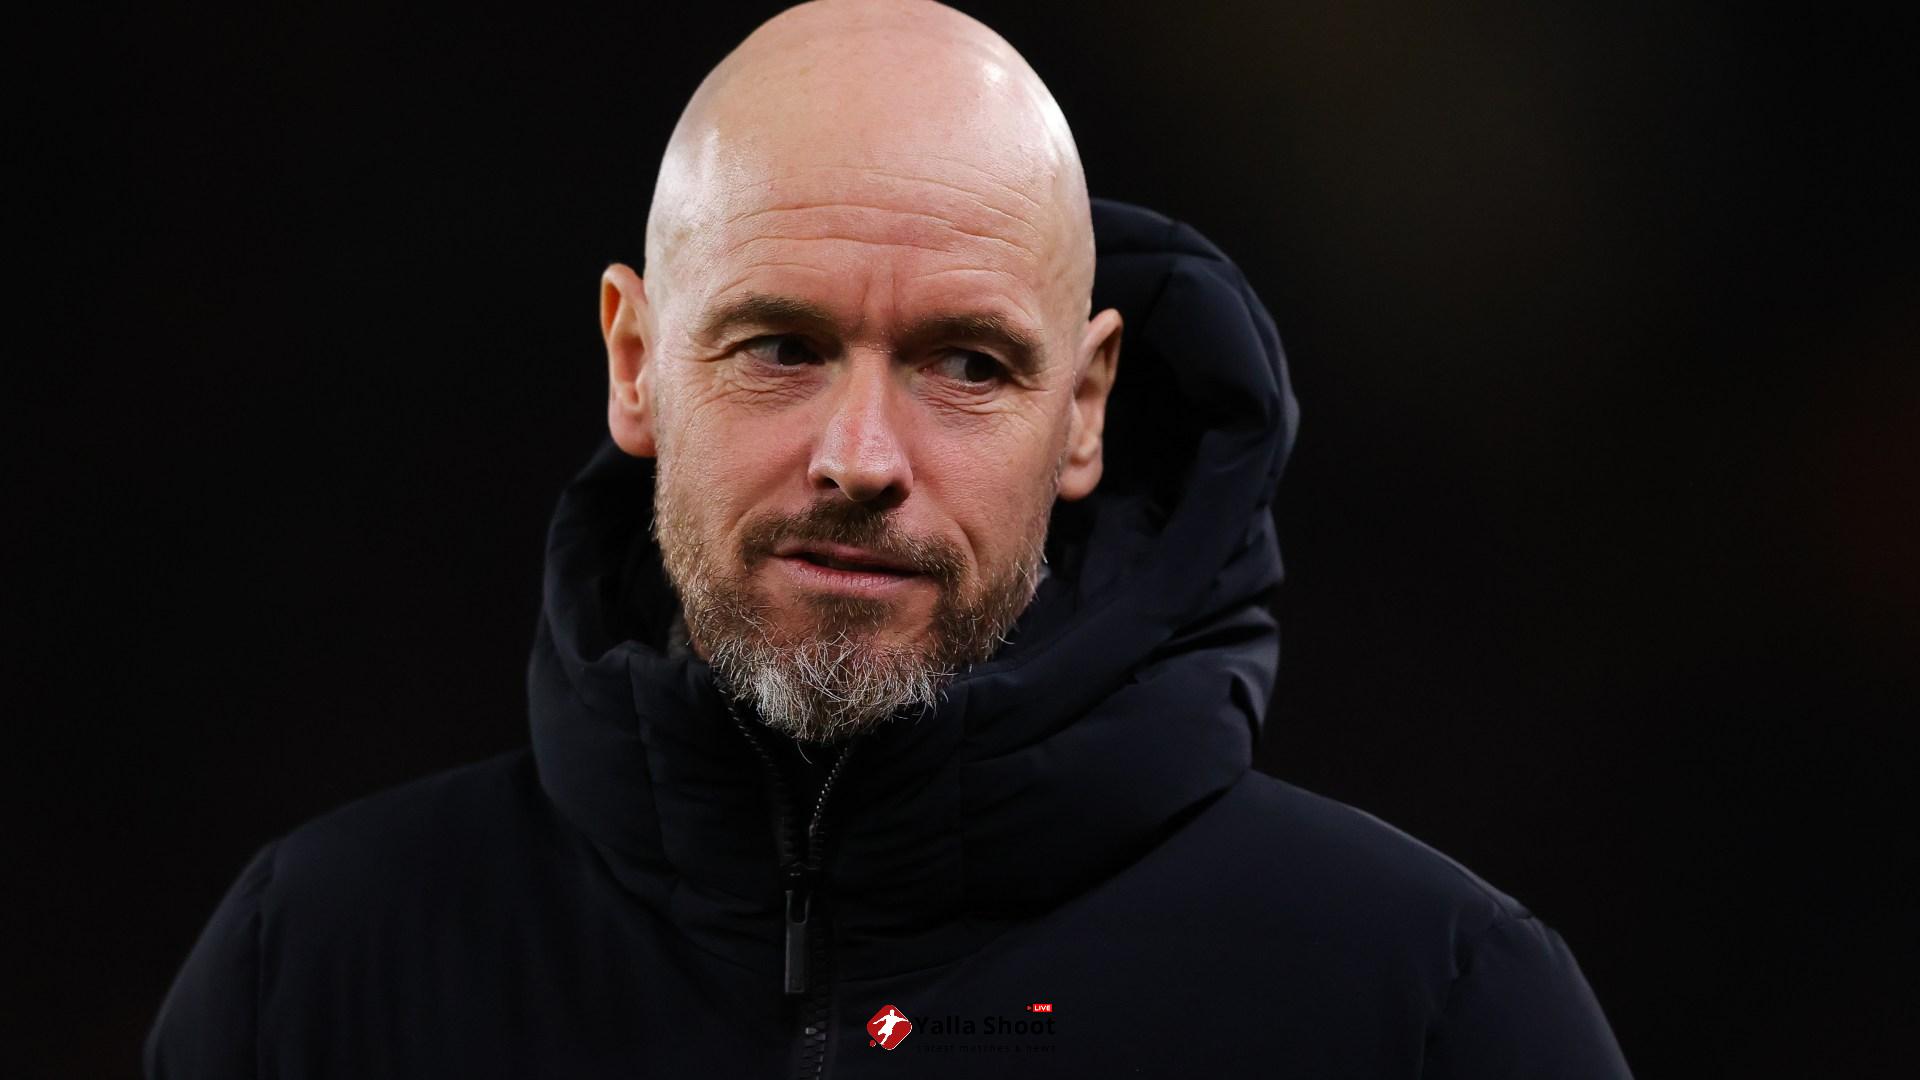 Erik ten Hag blasts FFP rules after Man Utd were forced to flog 13 players in January - and still couldn't sign anyone